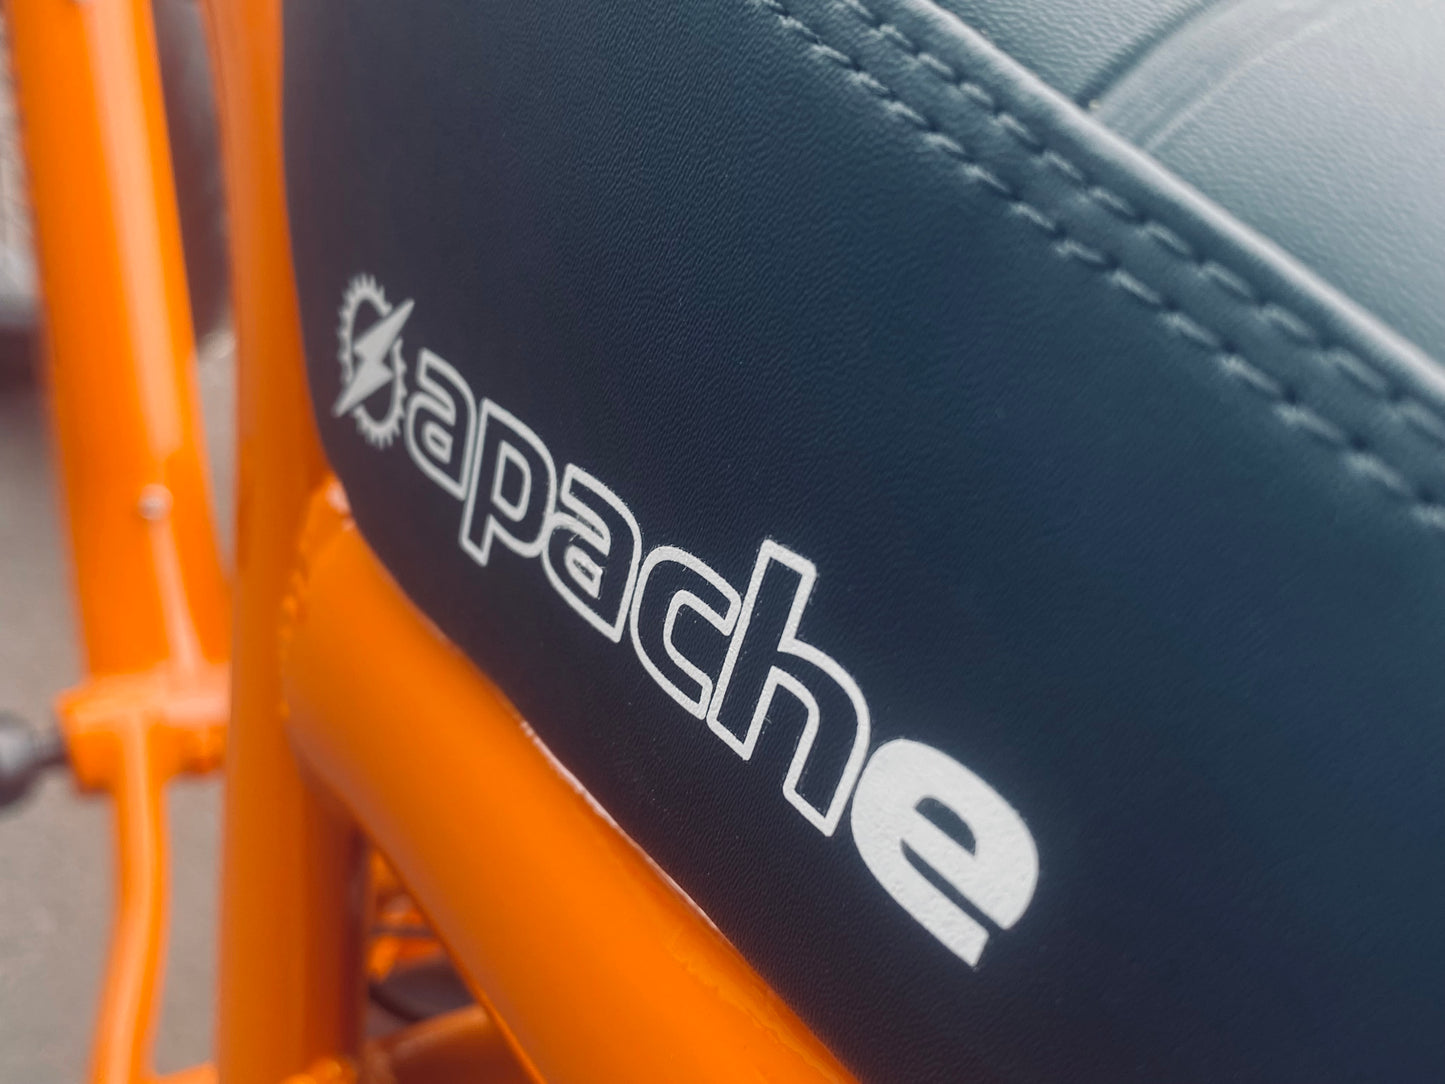 The Apache Electric Bike combines a great look, a comfortable riding position with quality components and manufacturing. From Boostbikes